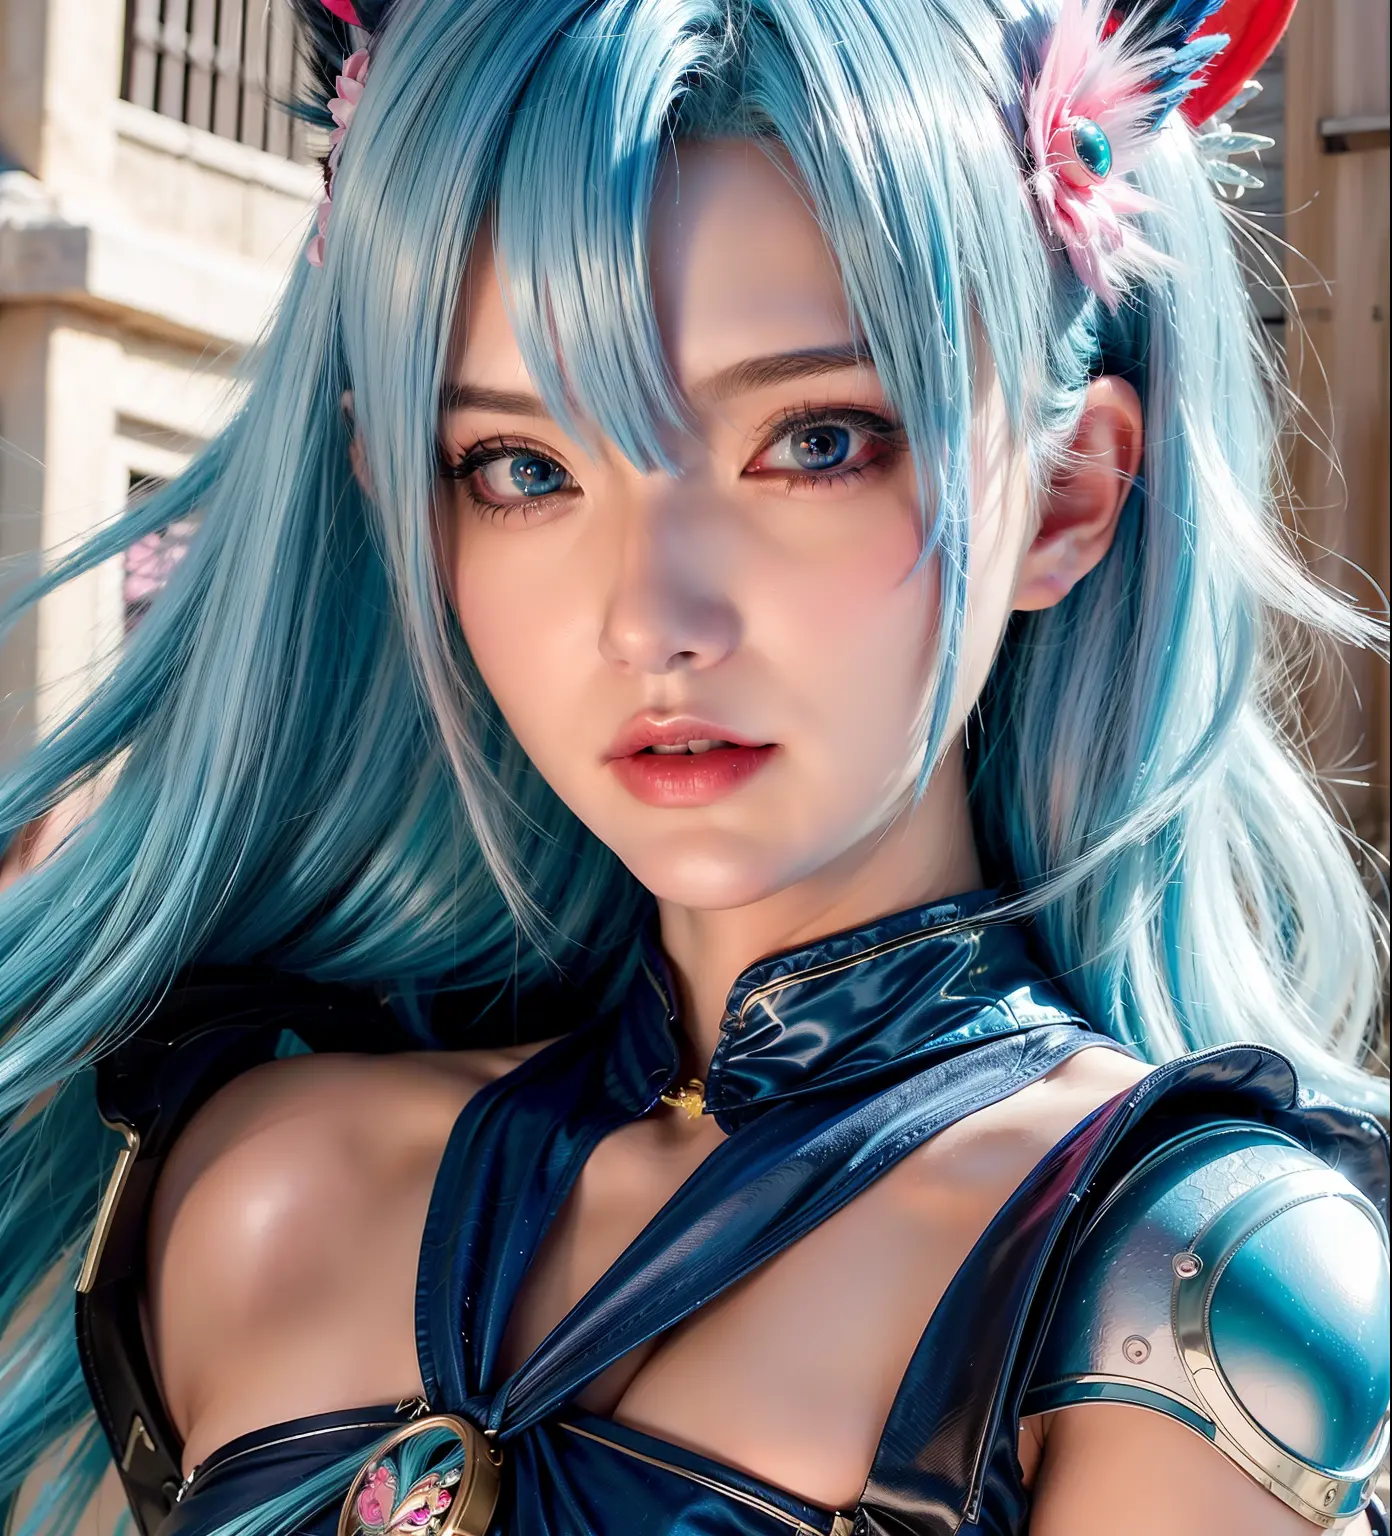 Close-up of C cup angel with blue hair and colorful hair, 8K high quality detailed art, fantasy art style, detailed digital anim...